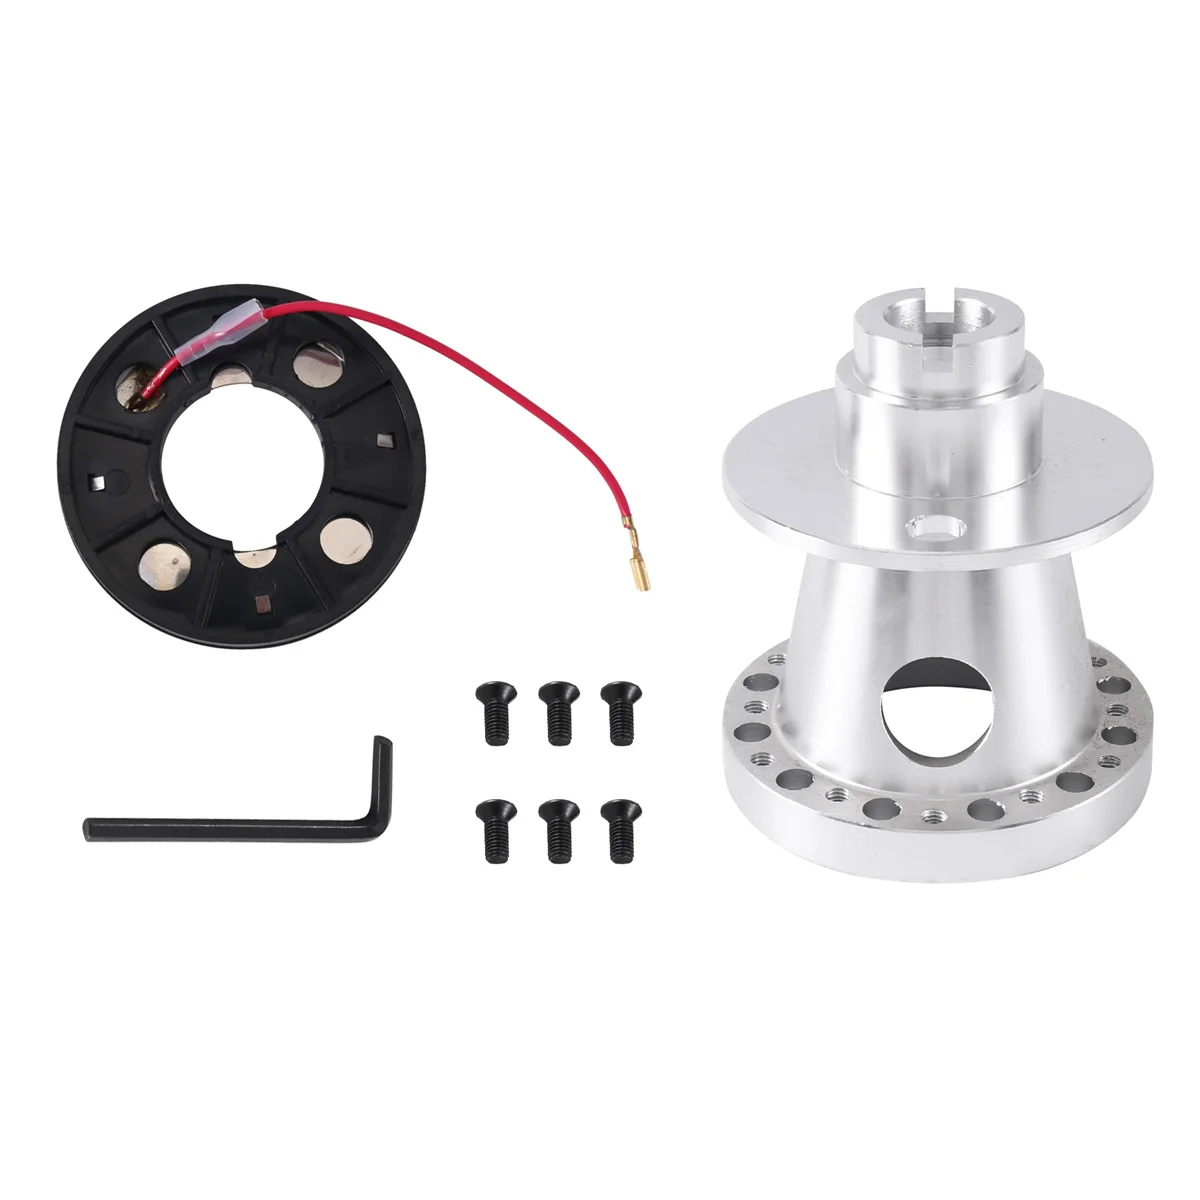 

OH-124 Automotive Quick Release Kit Wheel Adapter Steering Wheel Connector Disc Base Adapter for